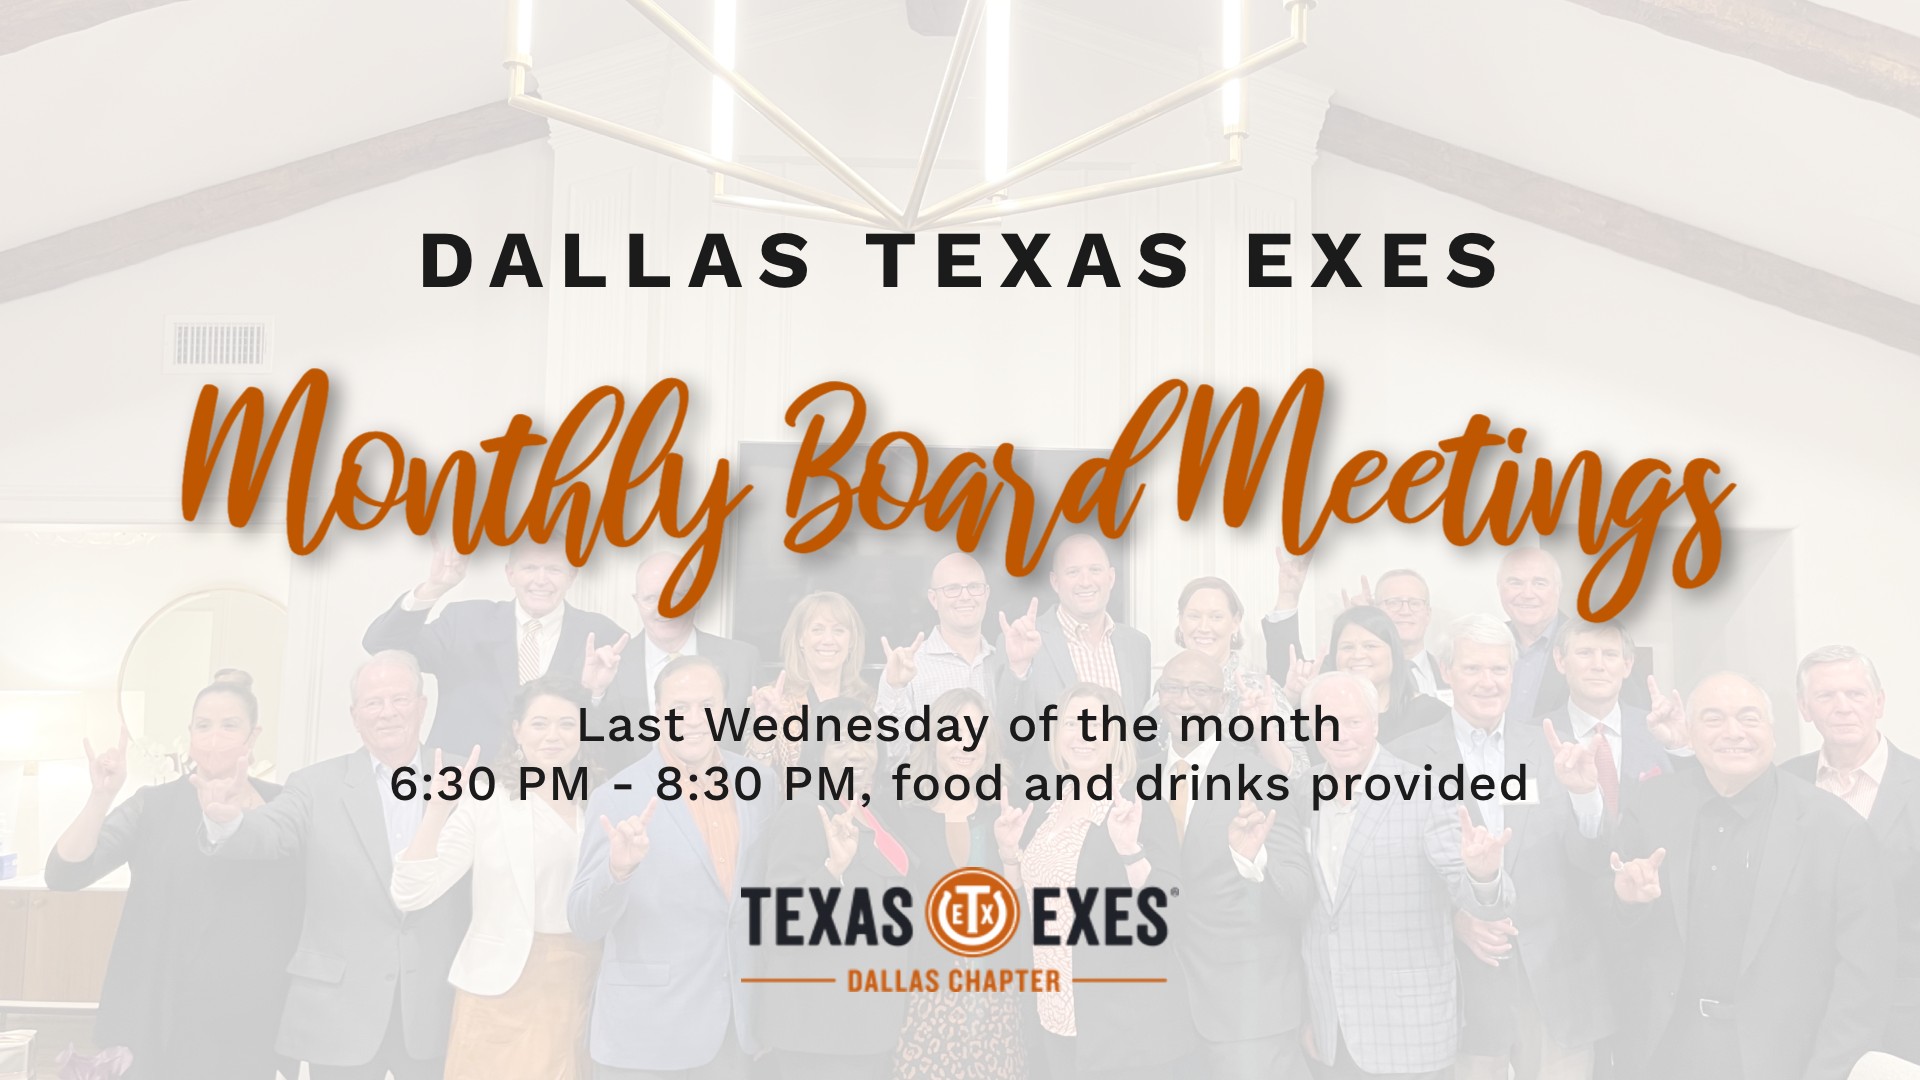 Dallas Texas Exes Monthly Board MEetings happen on the last Wednesday of the month from 6:30-8:30 pm. Food and drinks will be provided.